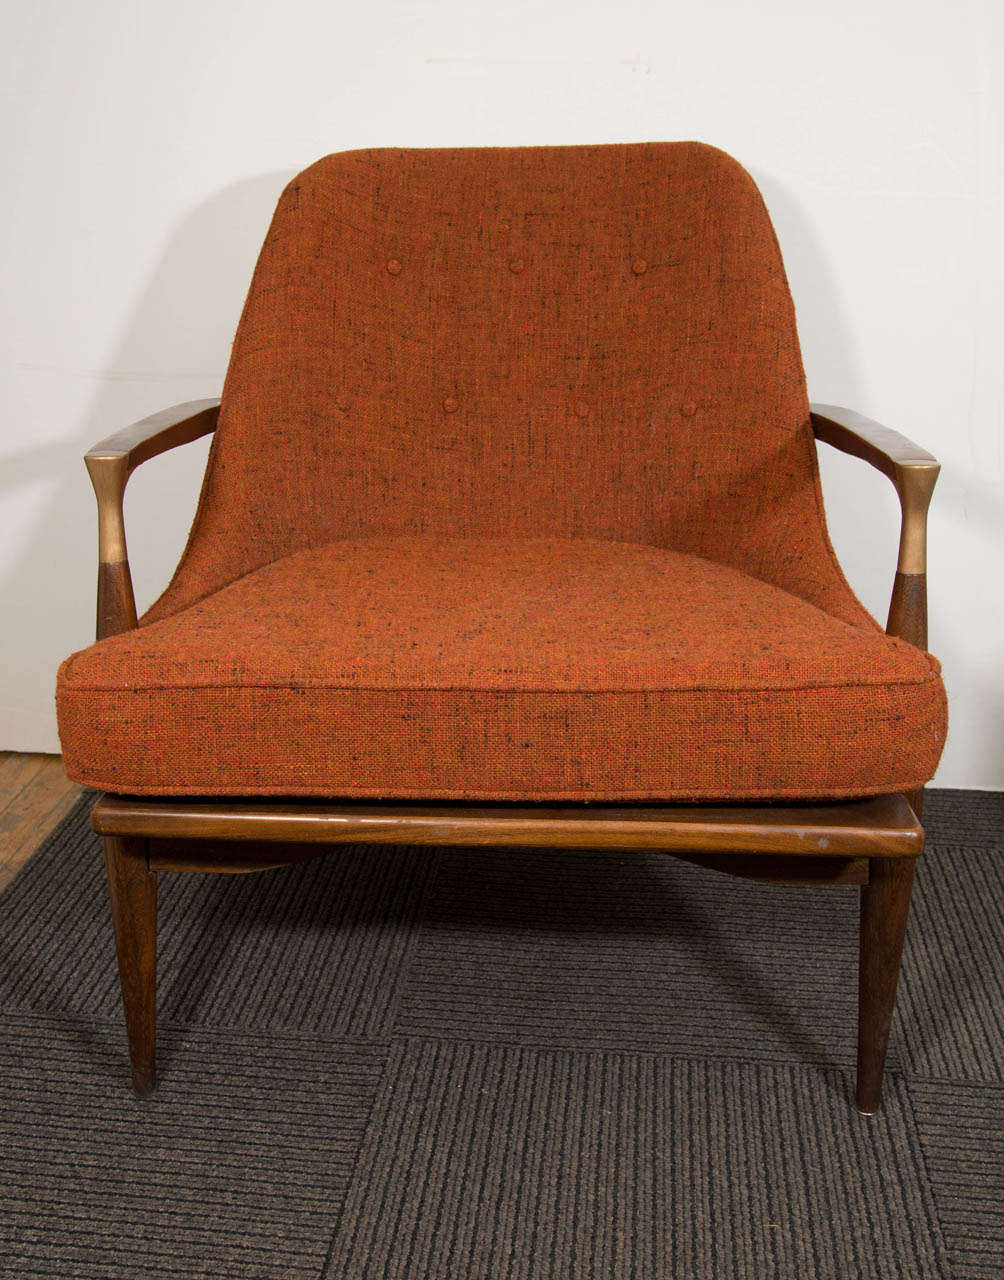 A vintage pair of Ib Kofod Larsen style lounge or armchairs with brass arm-joint detail and original orange upholstery.  In good condition with age appropriate wear.  Some minor scratches on the legs.

Reduced from: $7,500